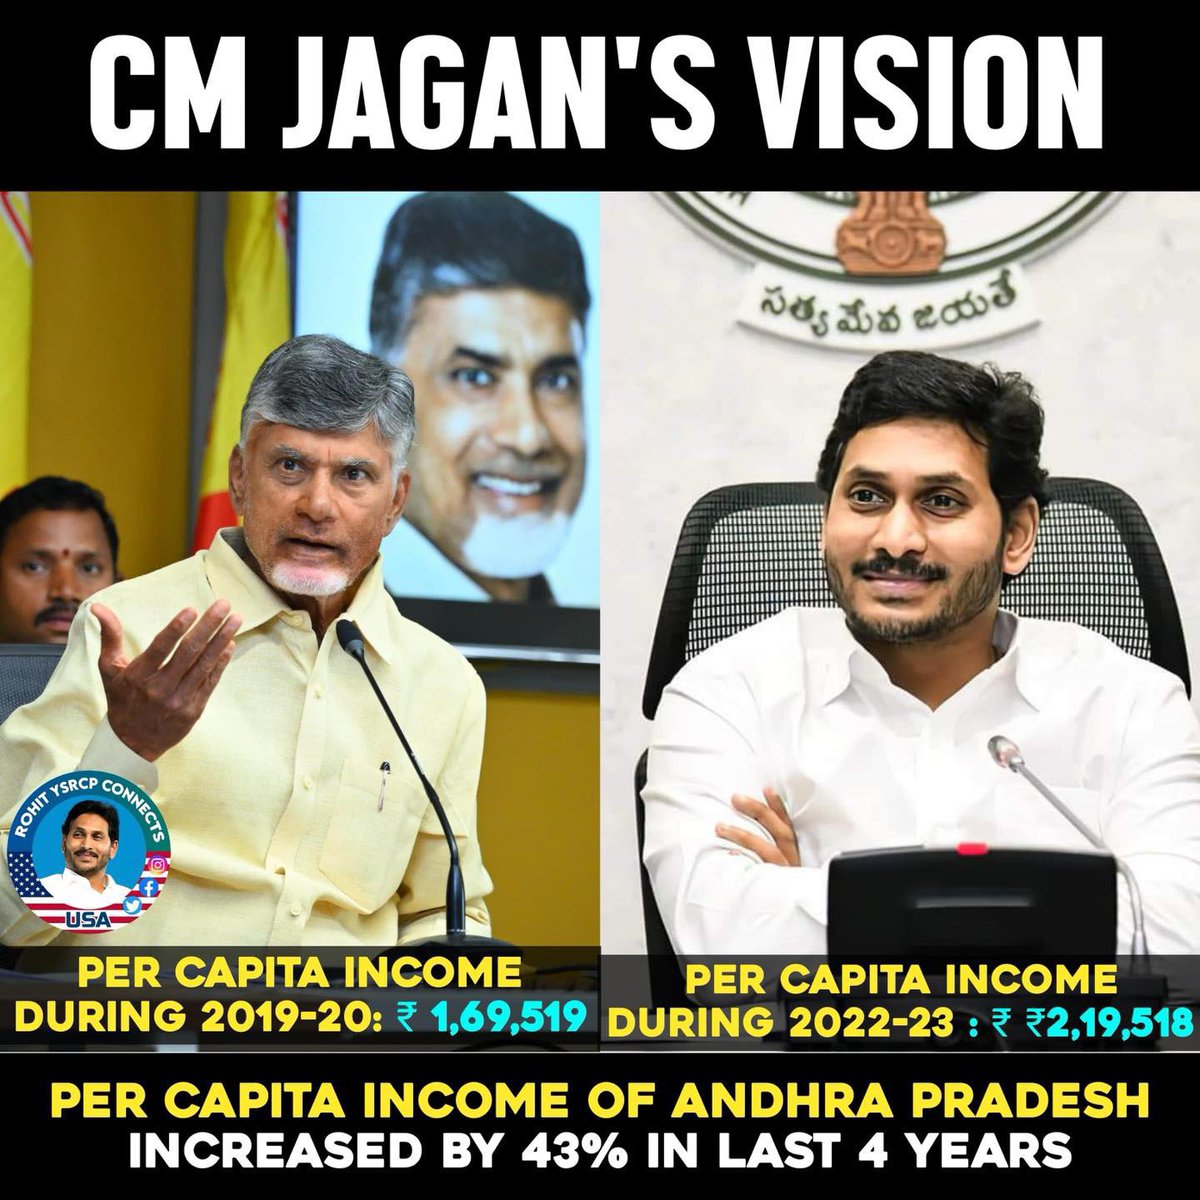 The leader @ysjagan has surpassed public expectations, and concurrently, the state of AP has achieved growth that eclipses the accomplishments of the CBN tenure.

#YSJaganDevelopsAP #nadunedu
#HiddenFactsbyYellowMedia
#AndhraPradesh #CMYSJagan 
#YSJaganMarkGovernance